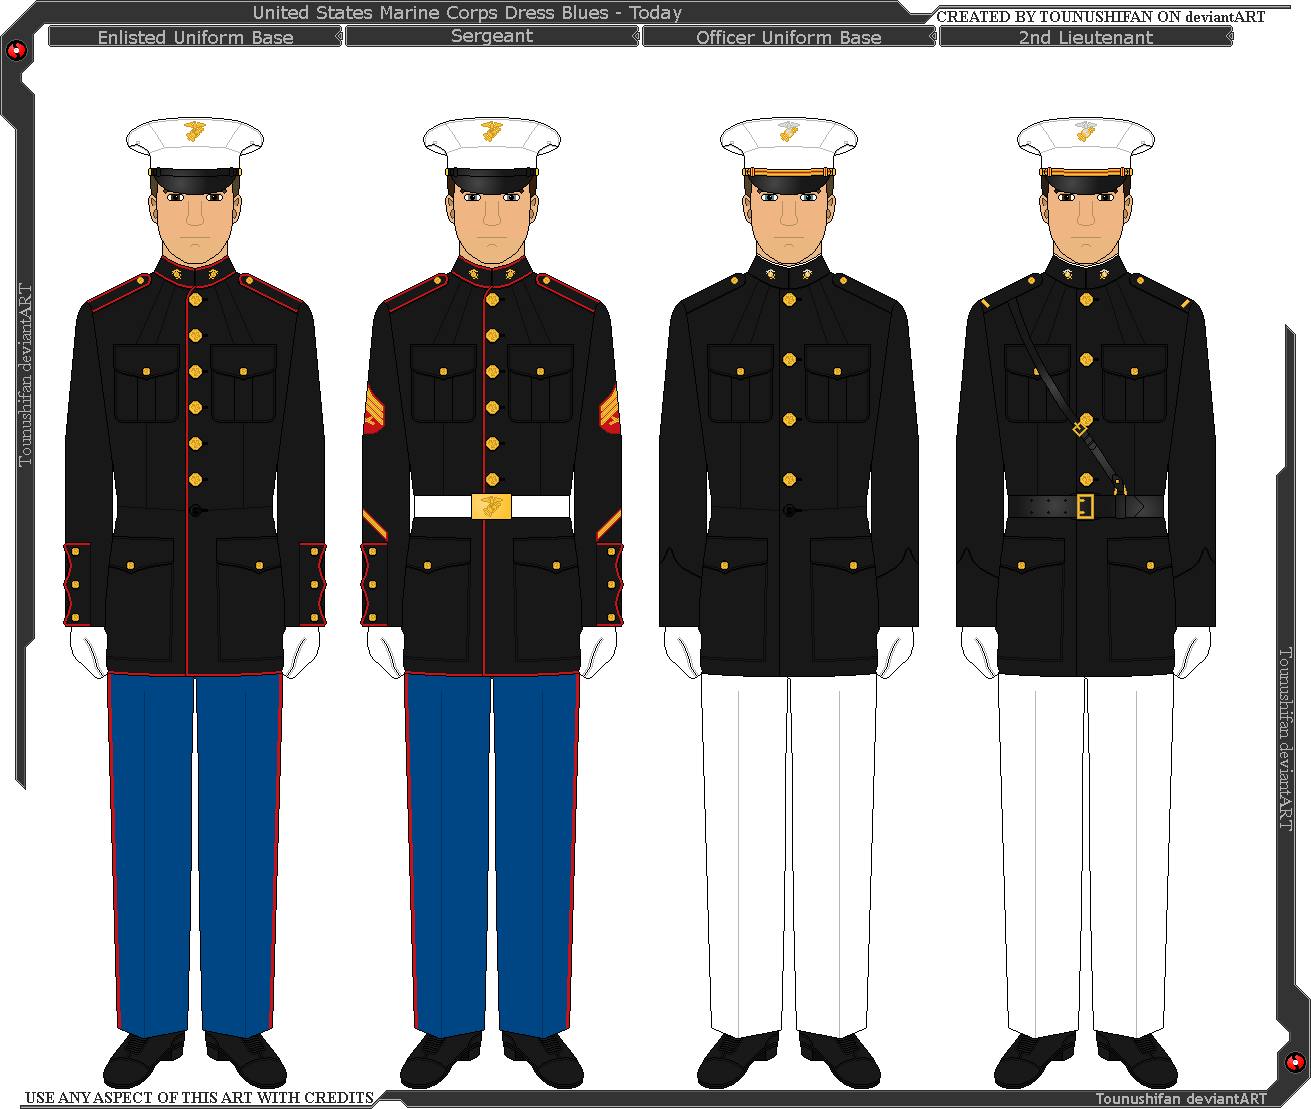 united-states-marine-corps-dress-blues-today-by-grand-lobster-king-on